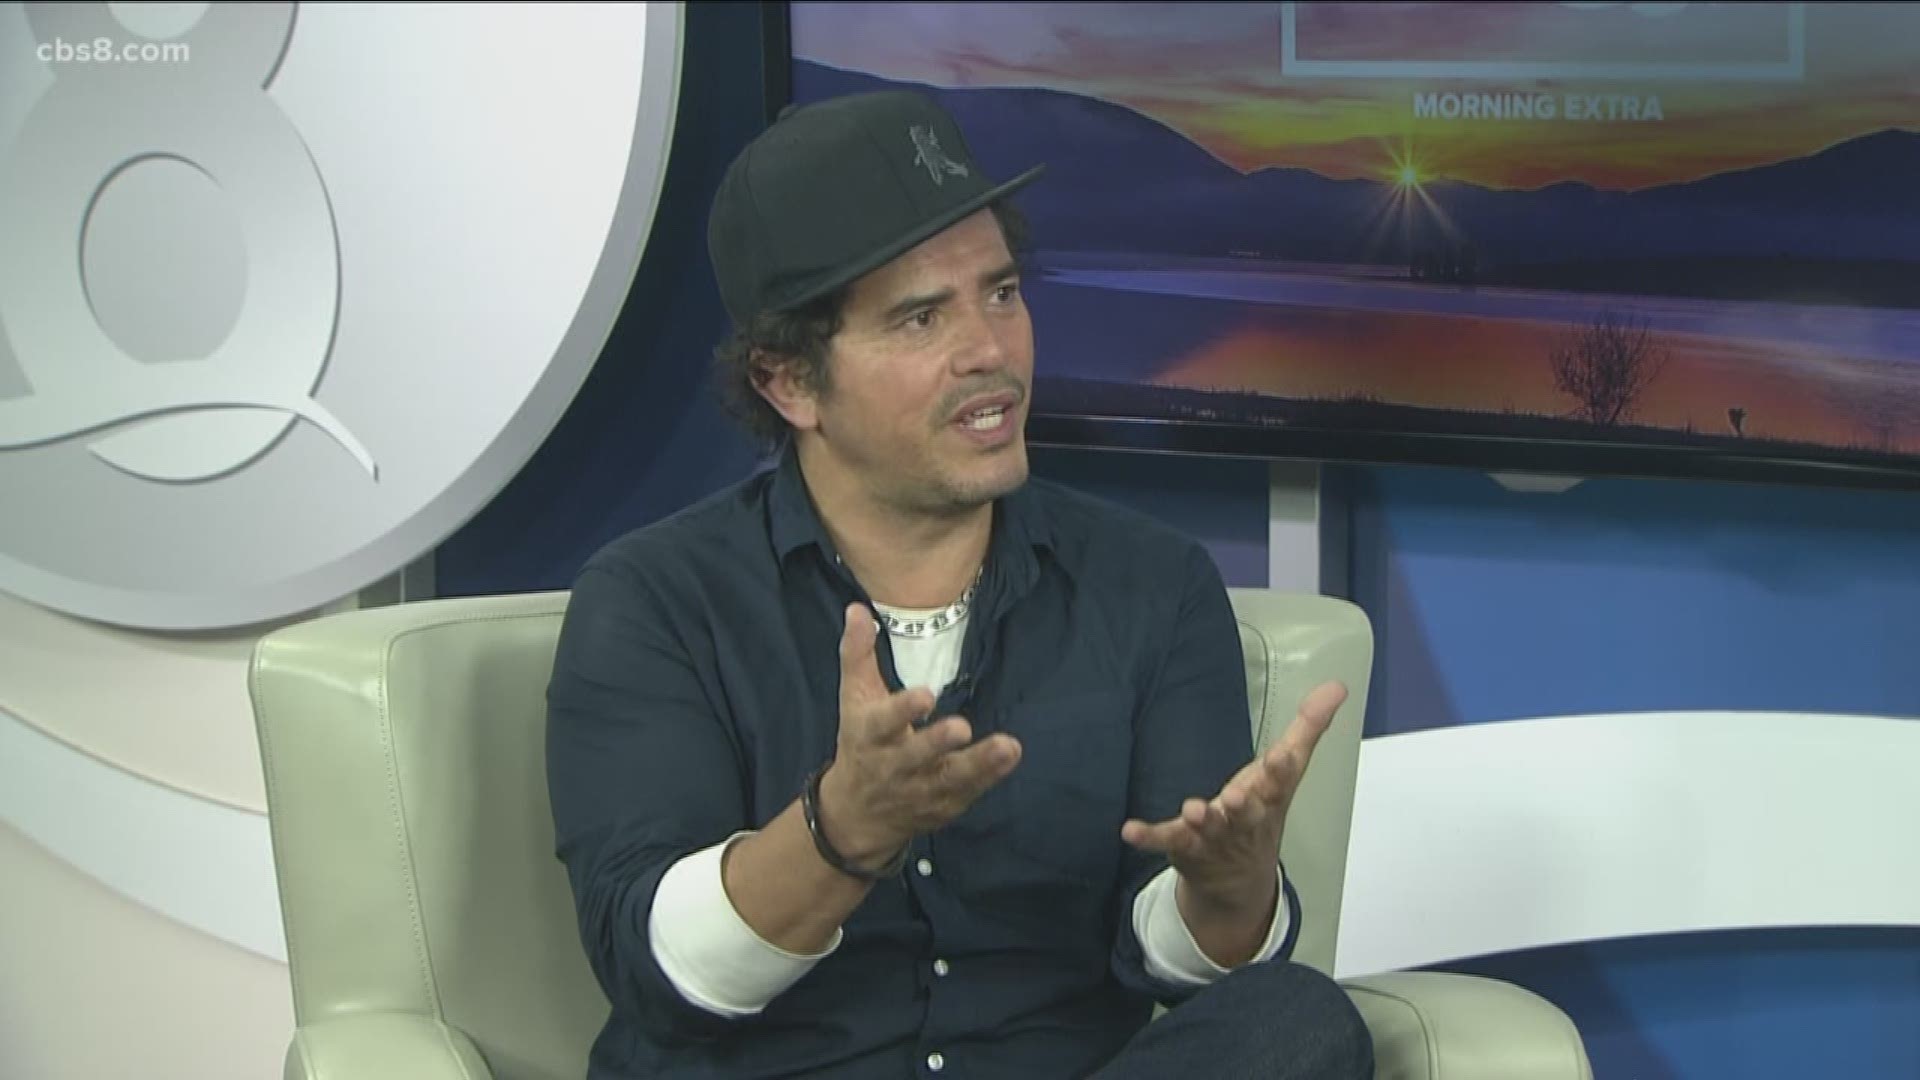 Actor, comedian and now the face of a superhero, John Leguizamo, is here to share how you can help bring PhenomX to life.